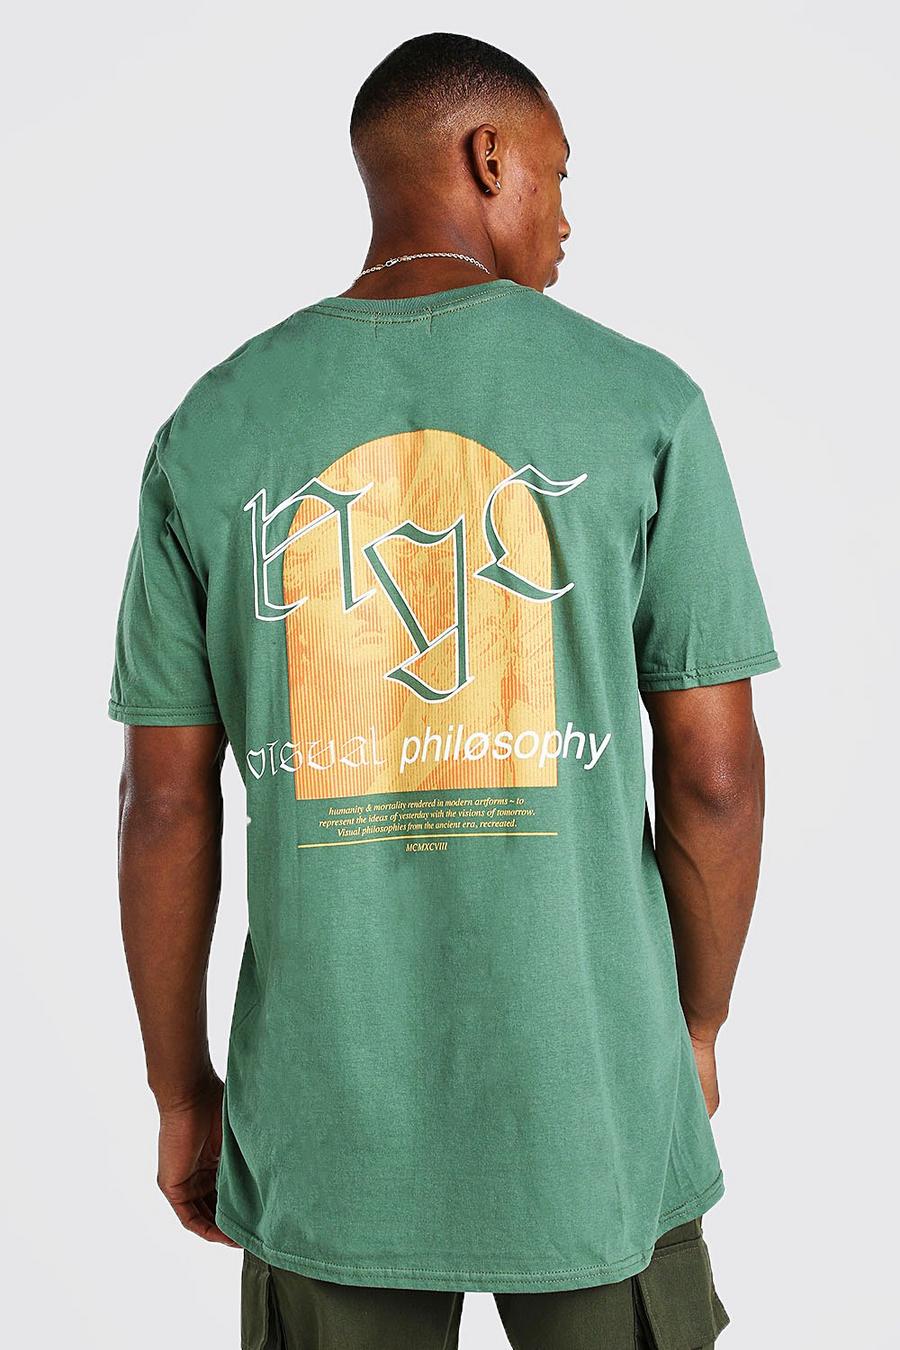 Green Oversized Nyc Philosophy Graphic T-Shirt image number 1